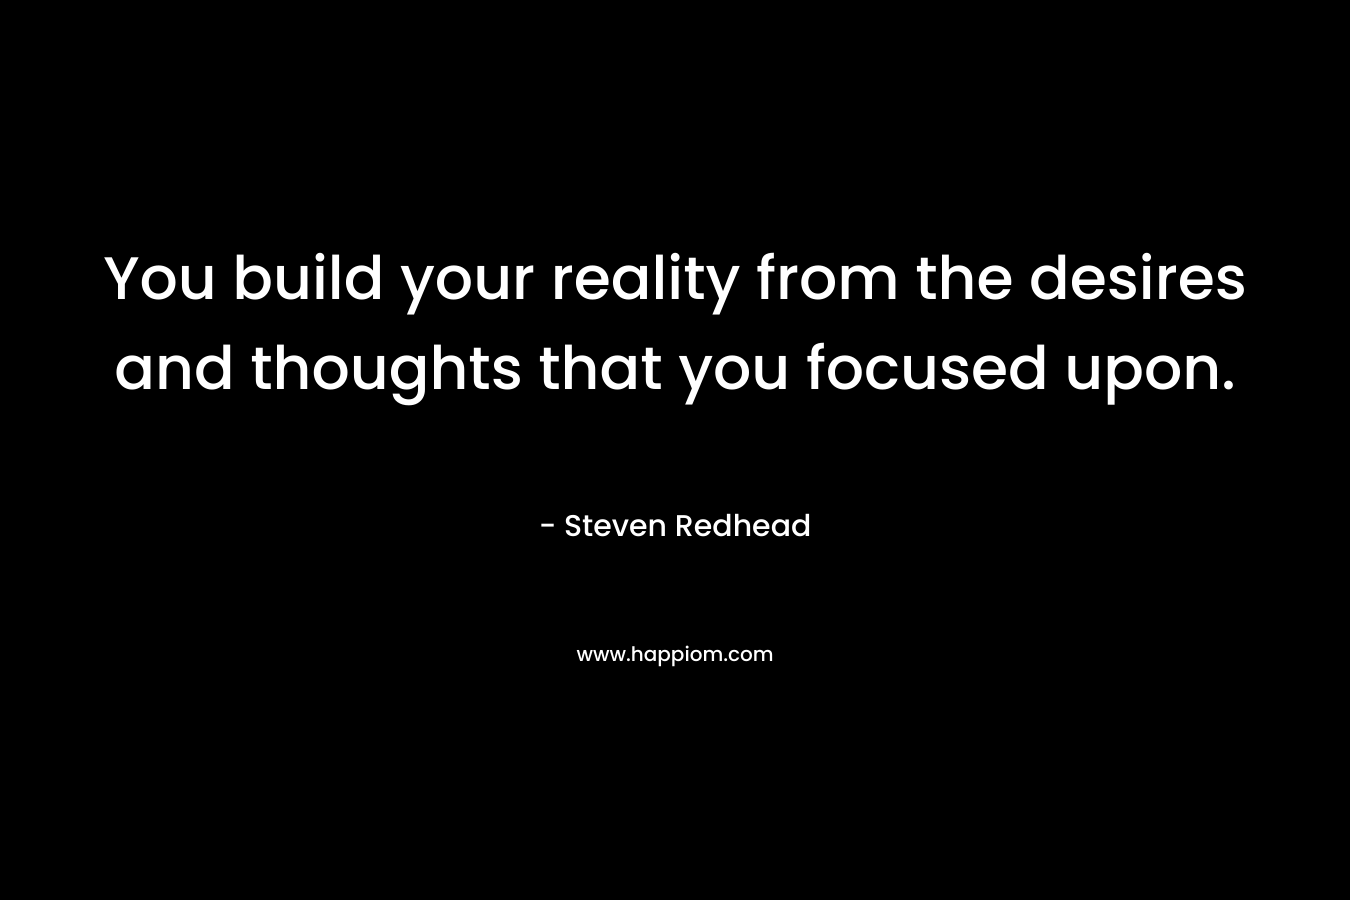 You build your reality from the desires and thoughts that you focused upon.